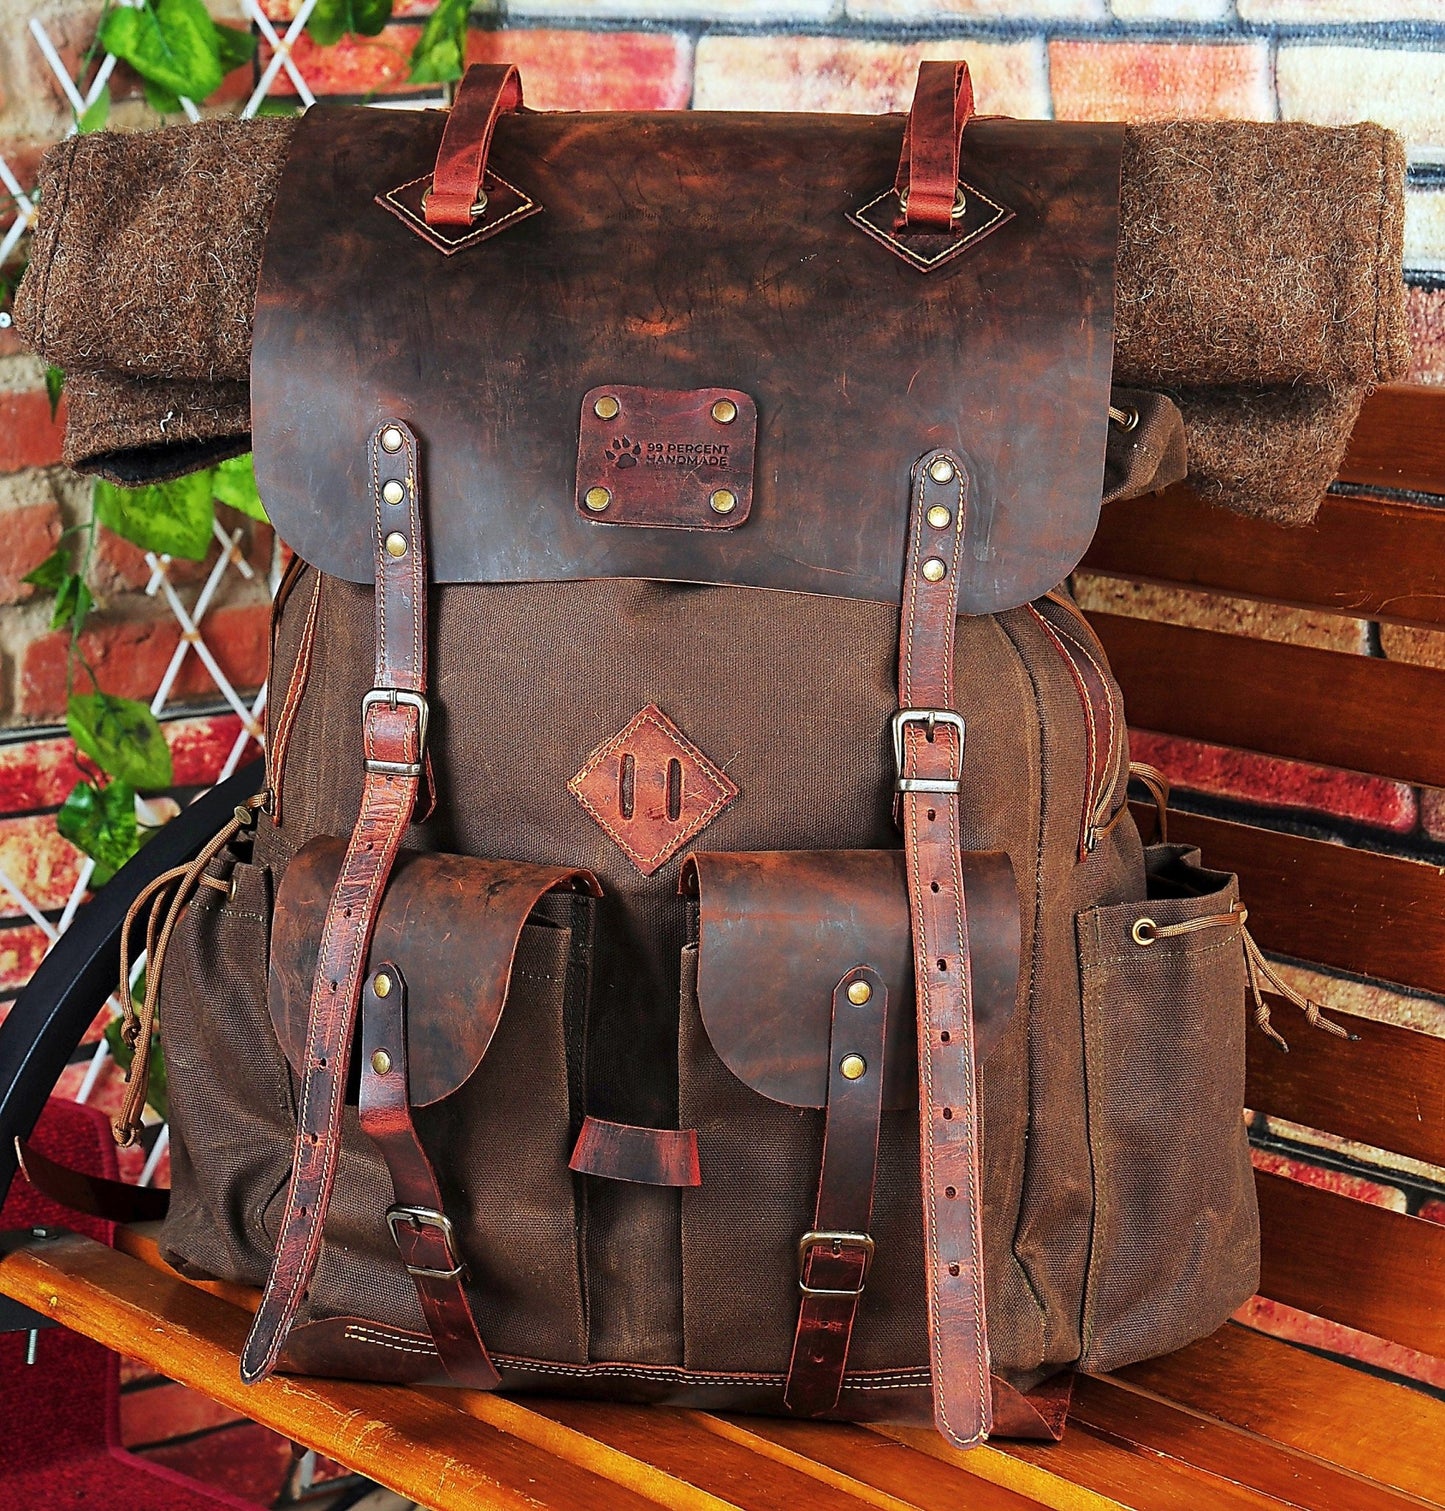 50L | 6 Pieces Left | Green, Brown, Dhaki Colours | Handmade Leather, Waxed Canvas Backpack for Travel, Camping, Bushcraft | Personalization bushcraft - camping - hiking backpack 99percenthandmade 30 Liters Brown C. - Brown L. 